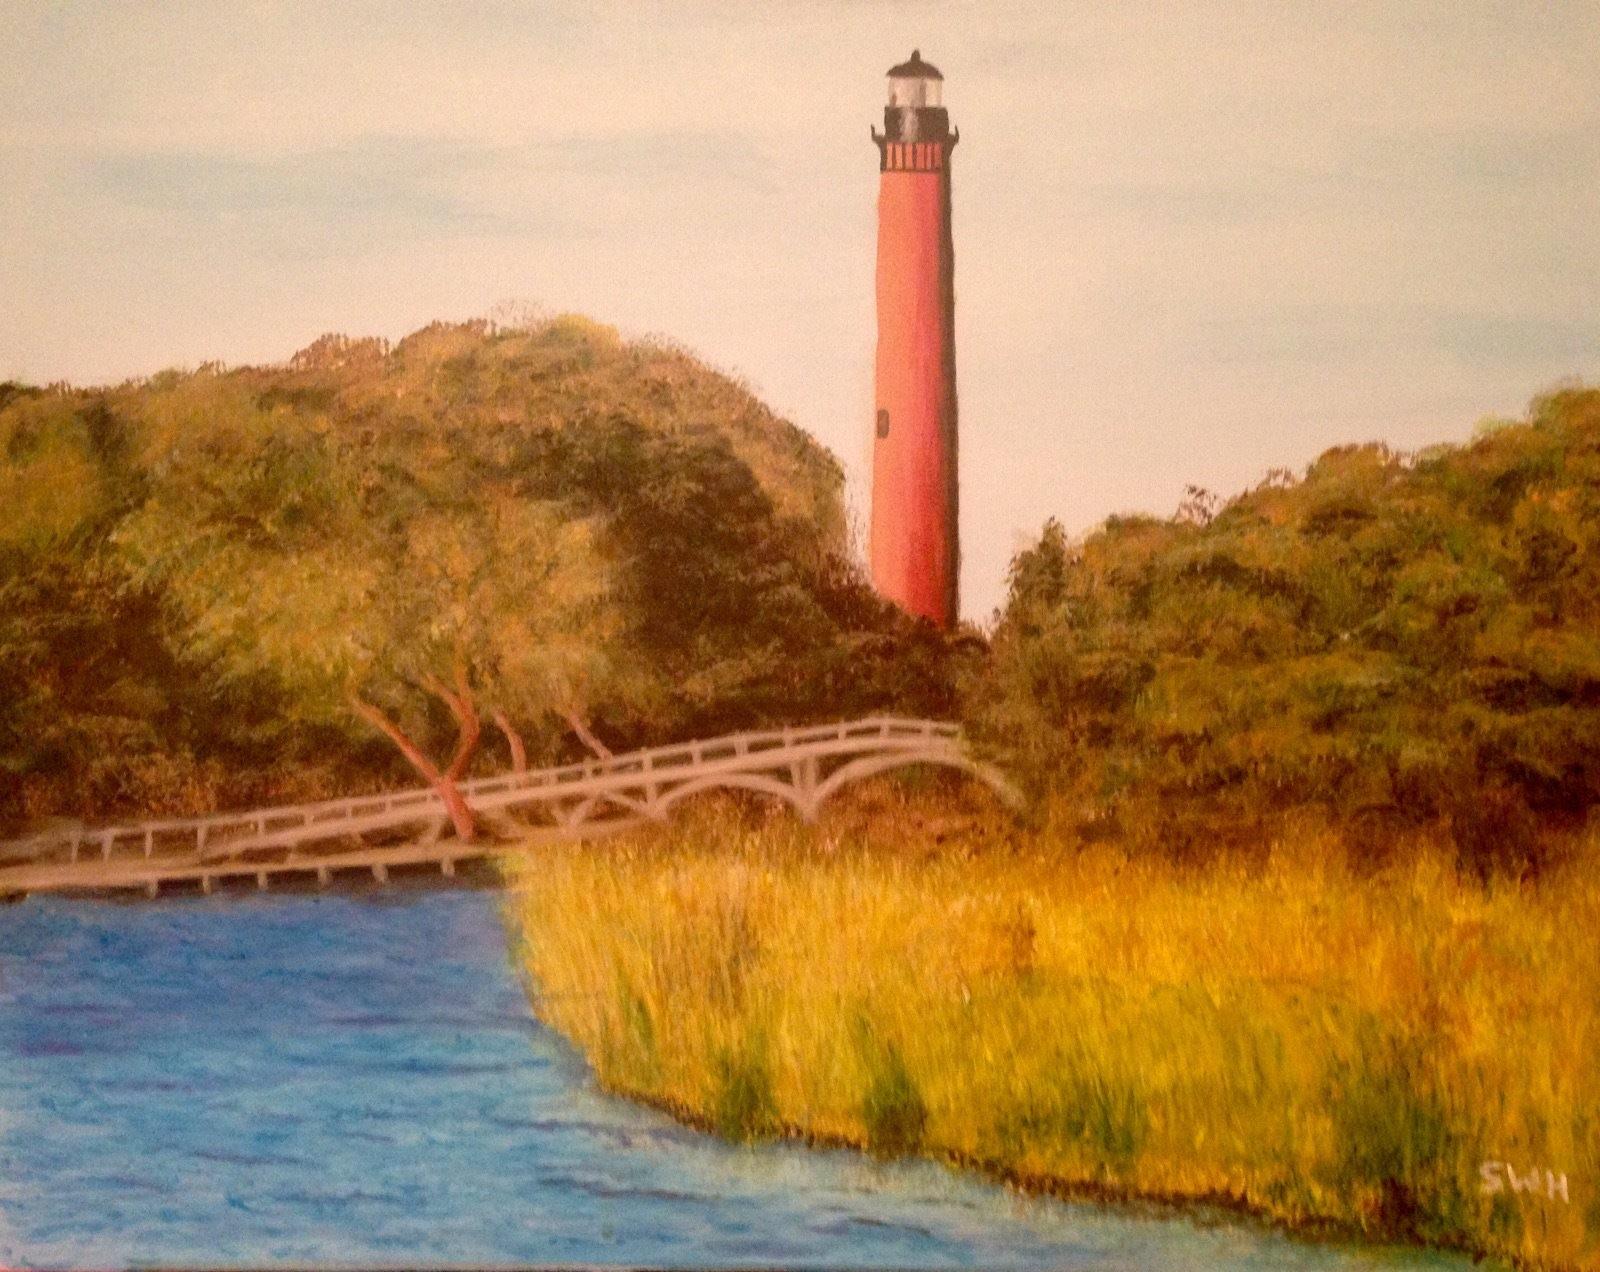 Acrylic painting of lighthouse on the Outer Banks of NC.